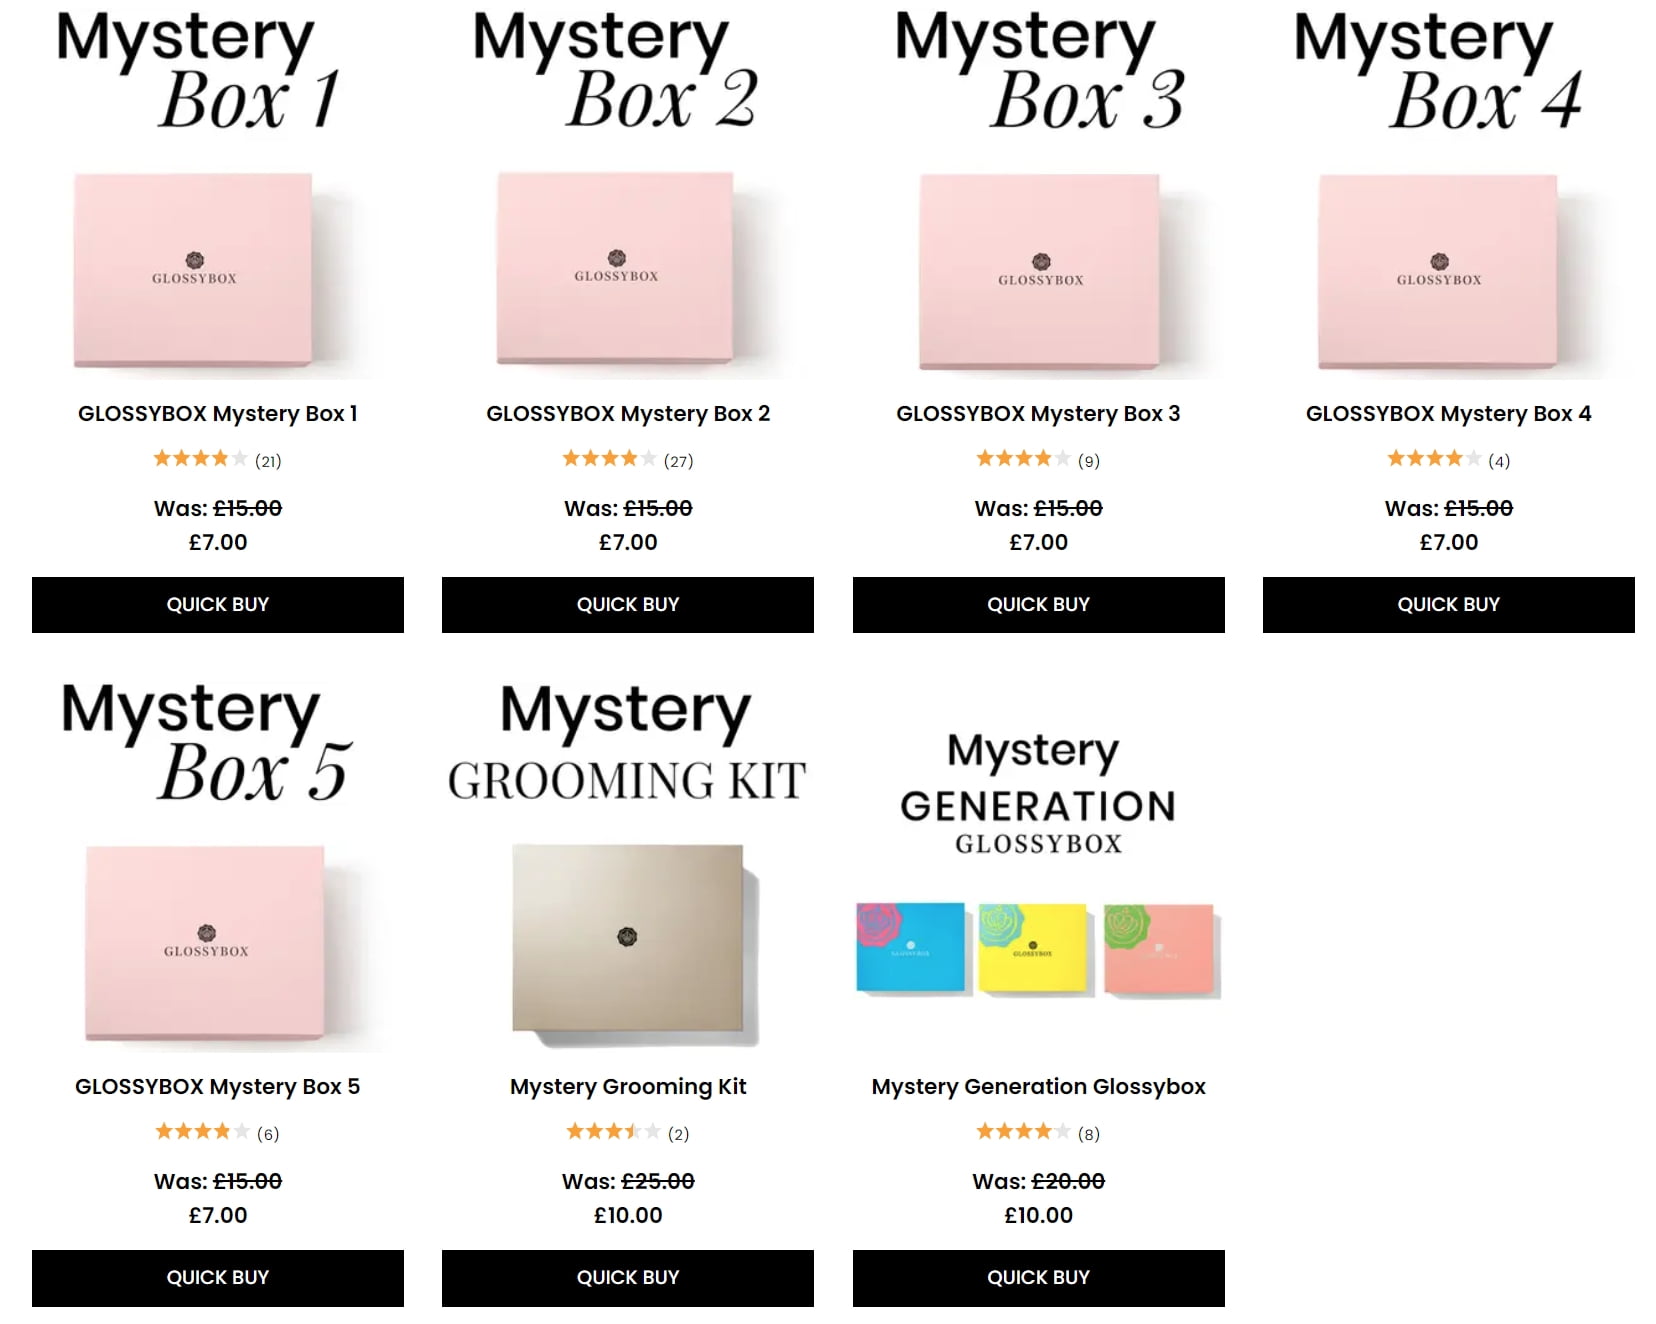 Mystery Box Sale at GlossyBox - Get yours for just £7 (was £15)